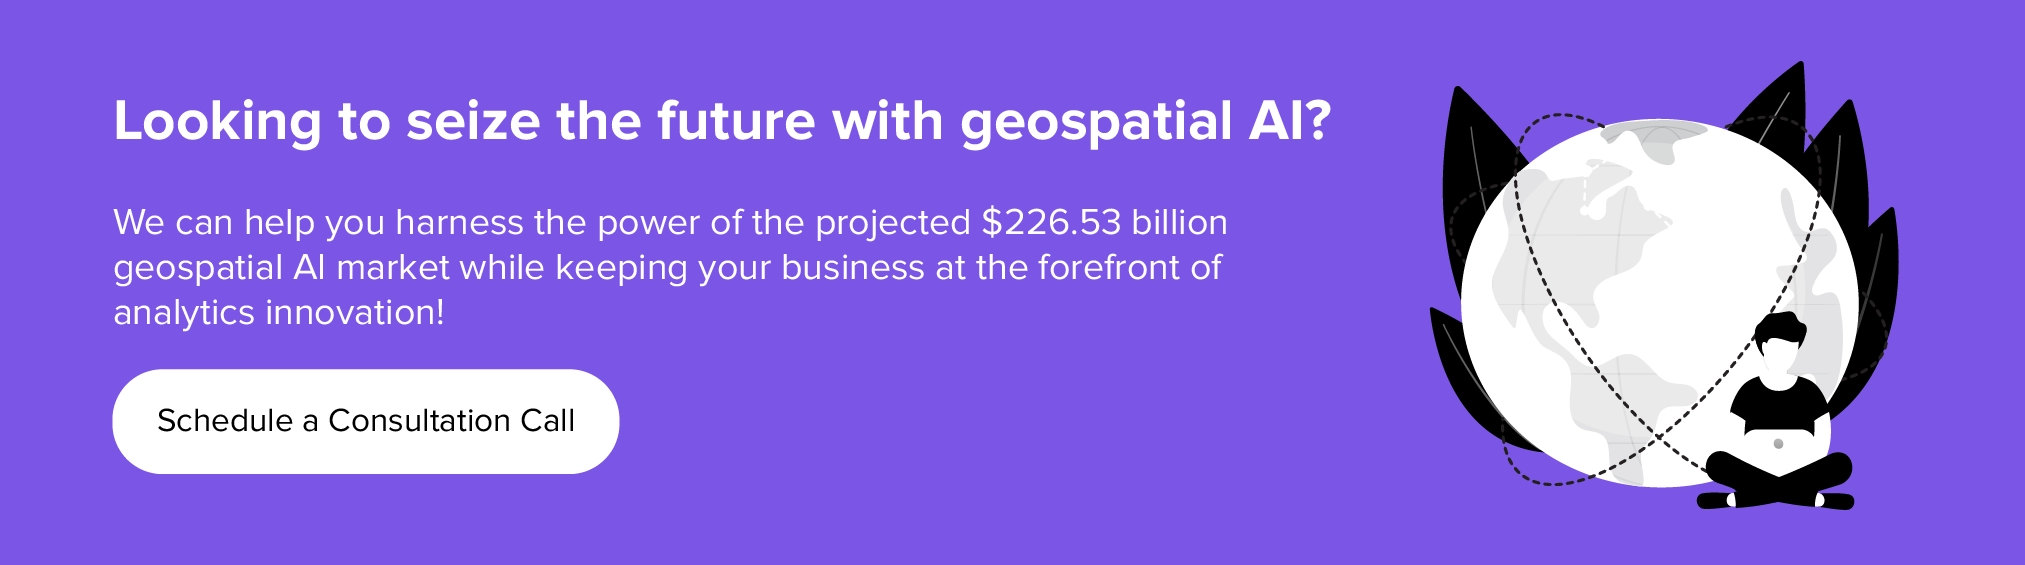 collaborate with us to seize the future with Geospatial AI